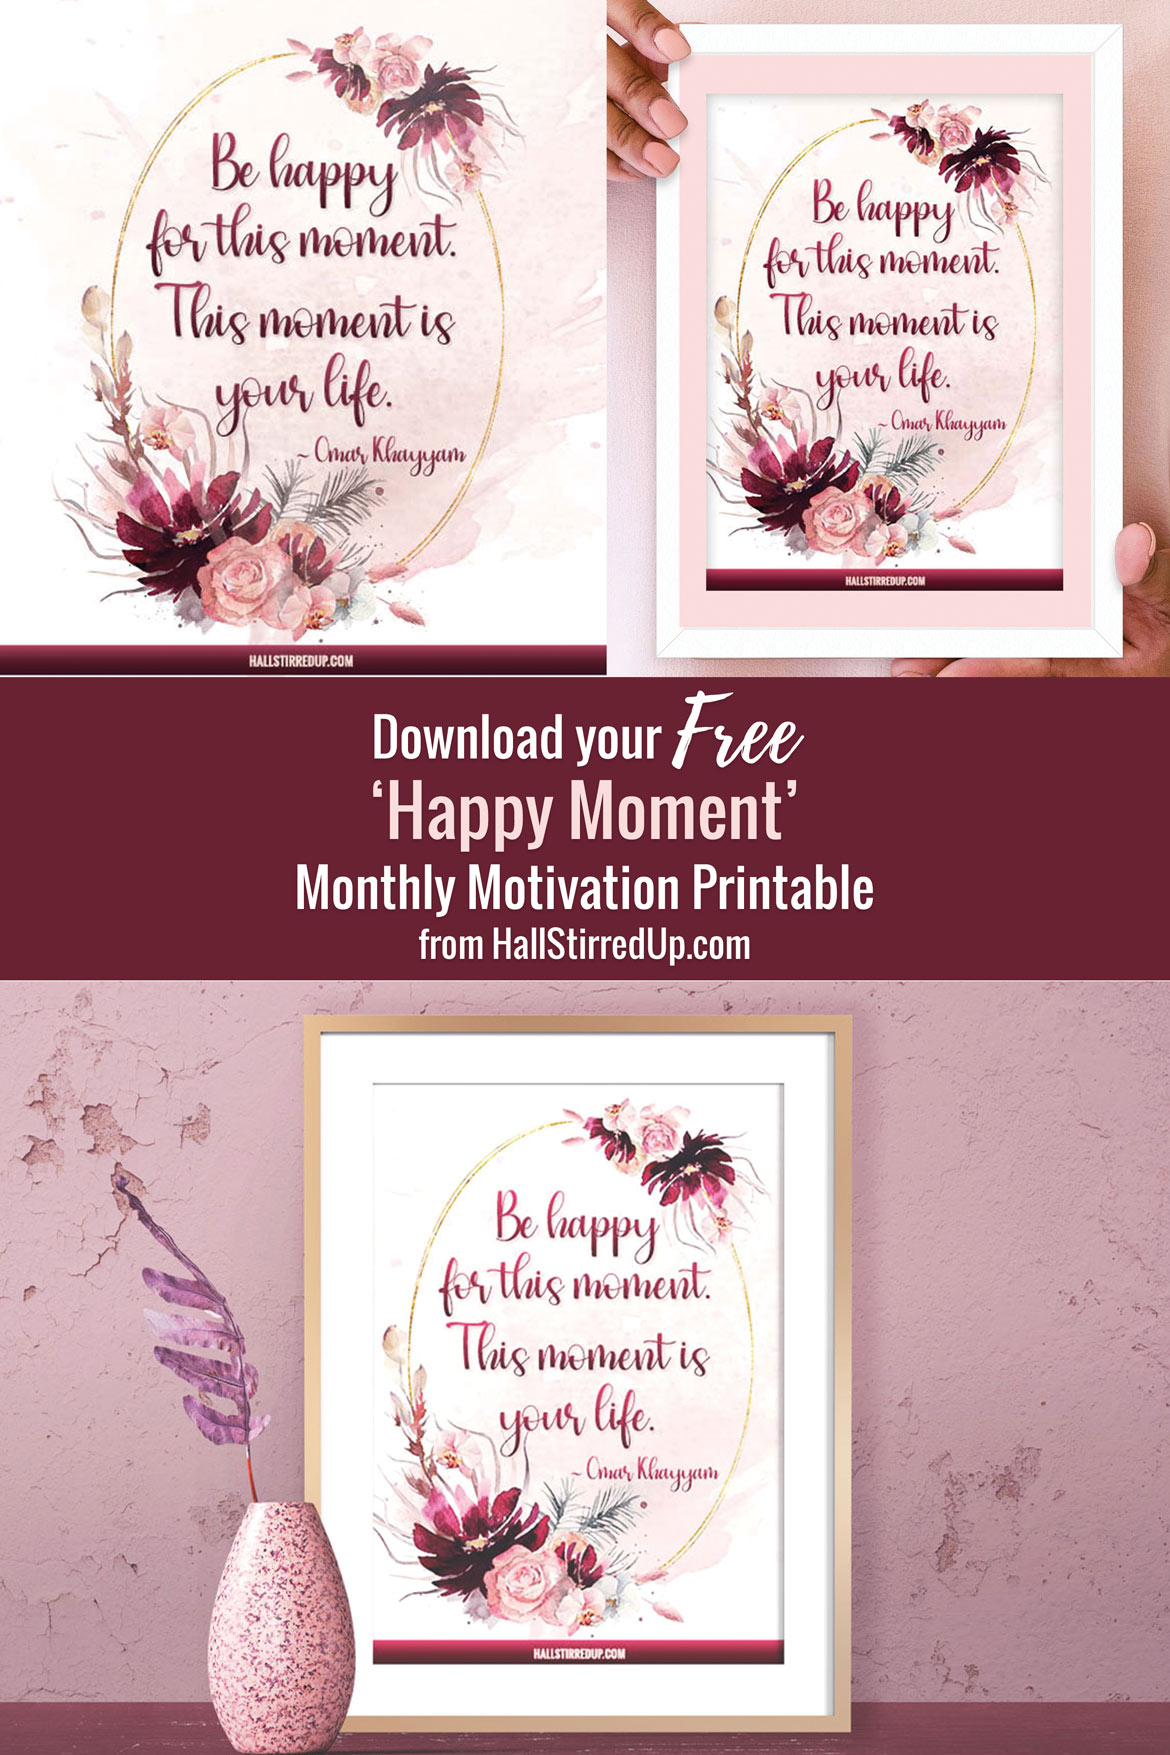 Be happy for today Monthly Motivation includes printable